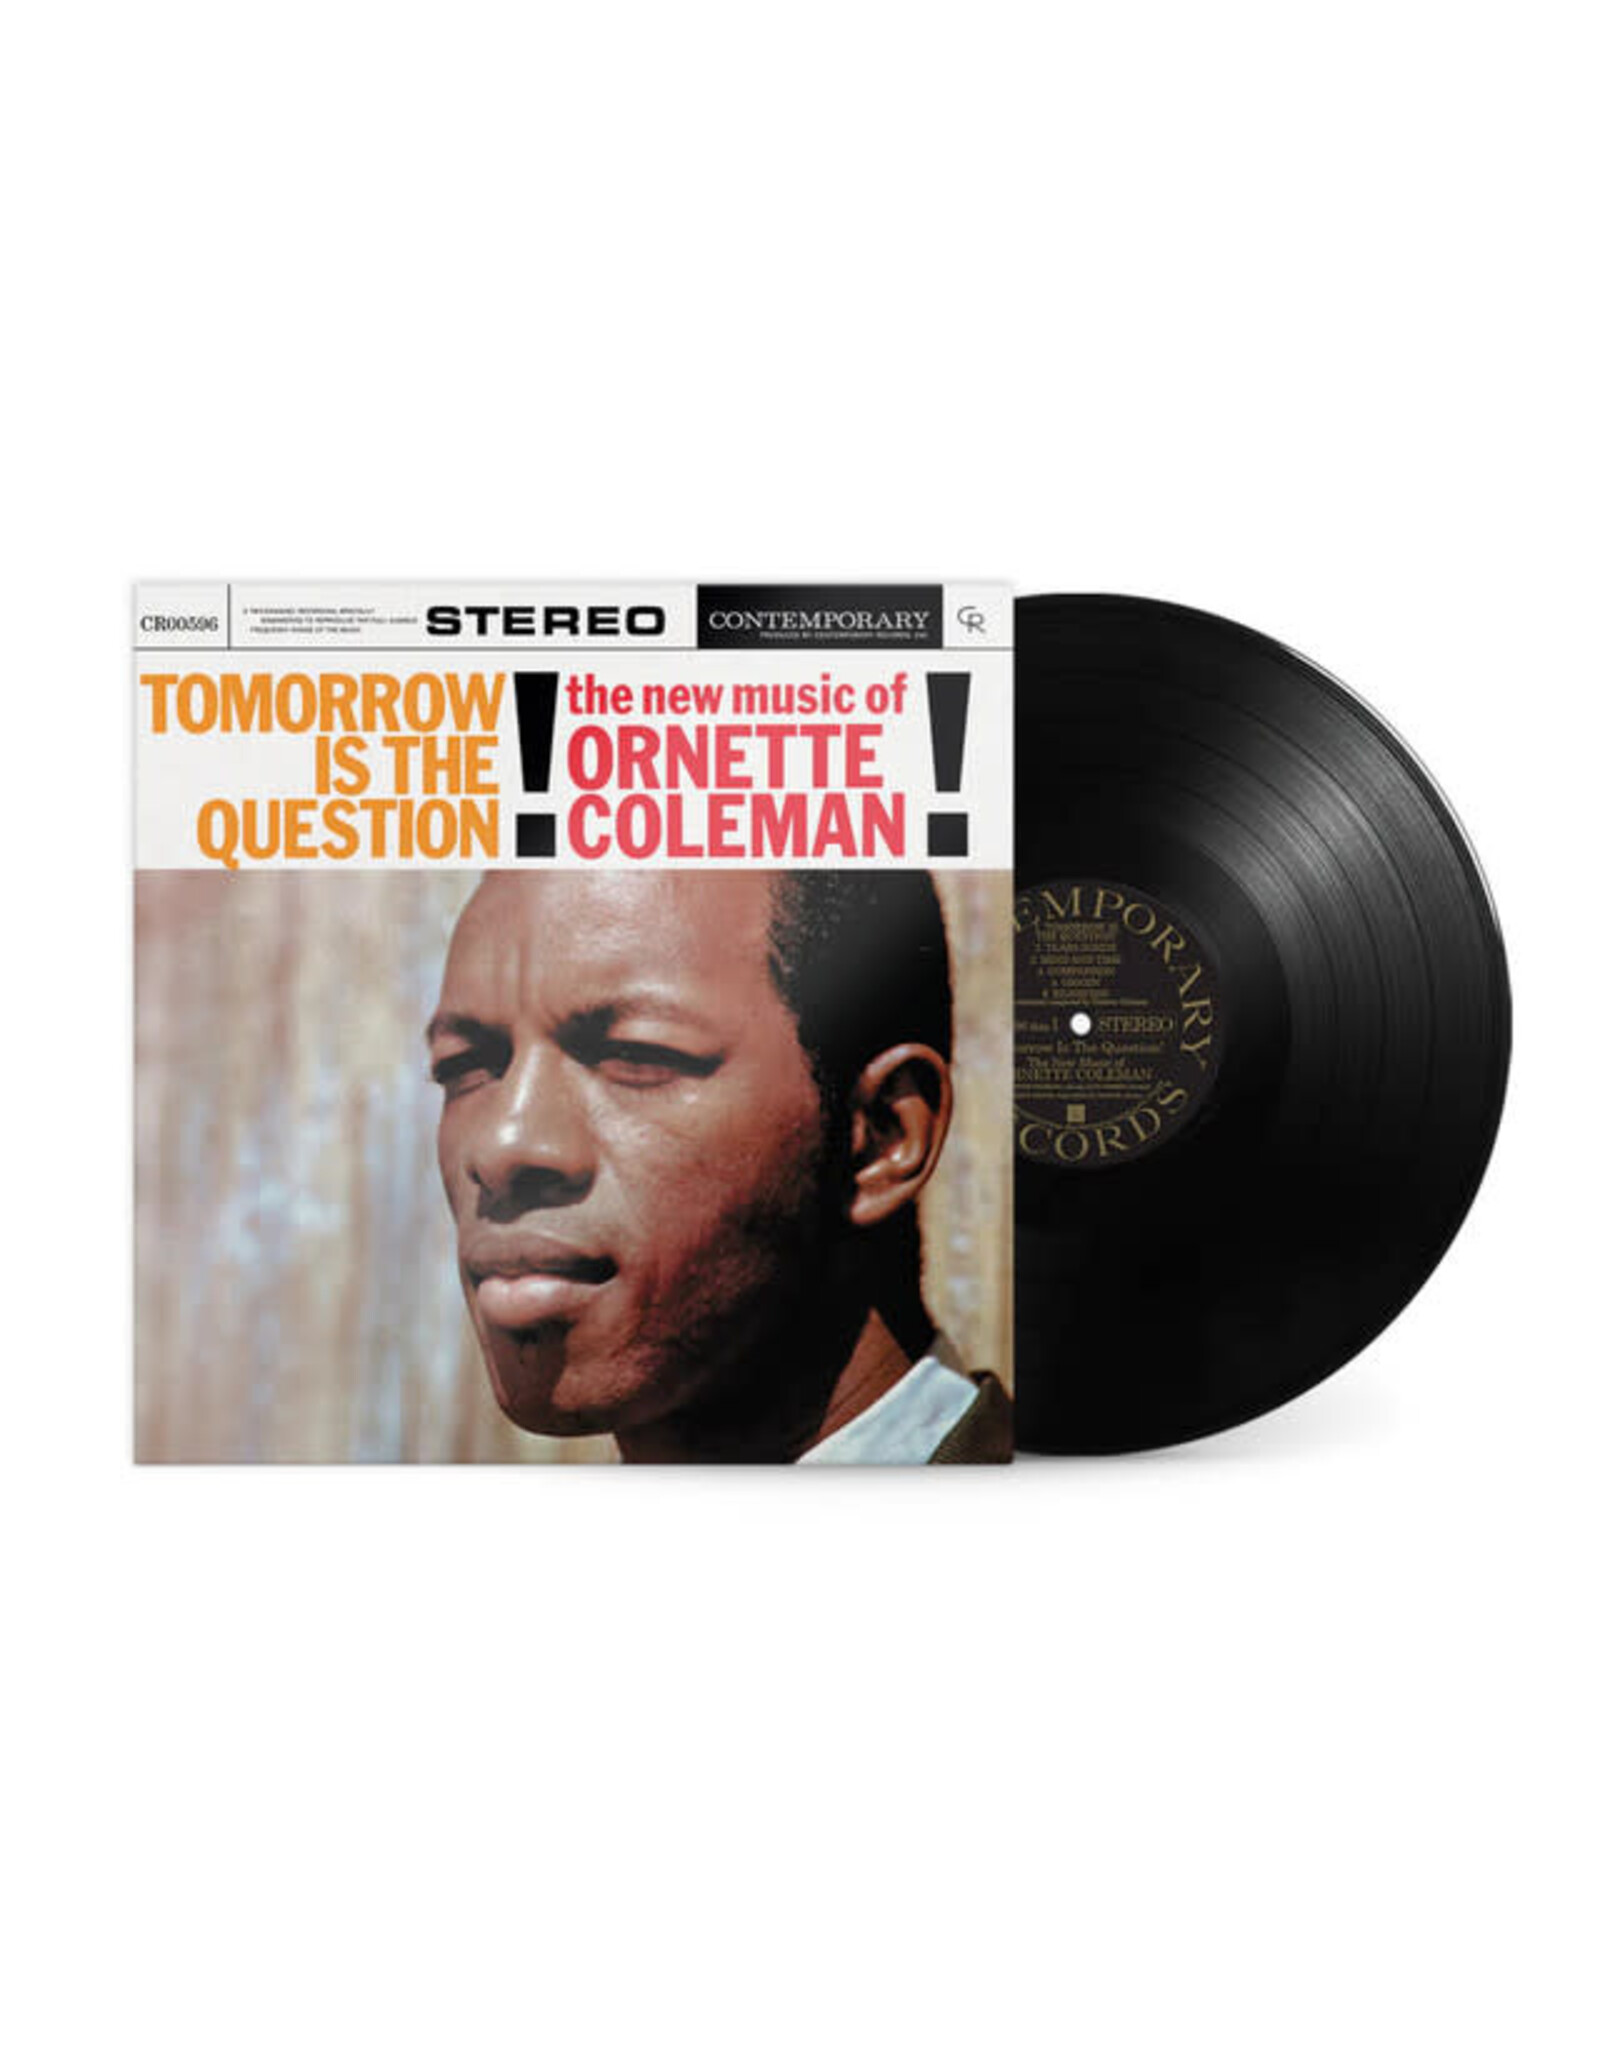 Craft Coleman, Ornette: Tomorrow Is The Question! (Contemporary Records Acoustic Sounds) LP